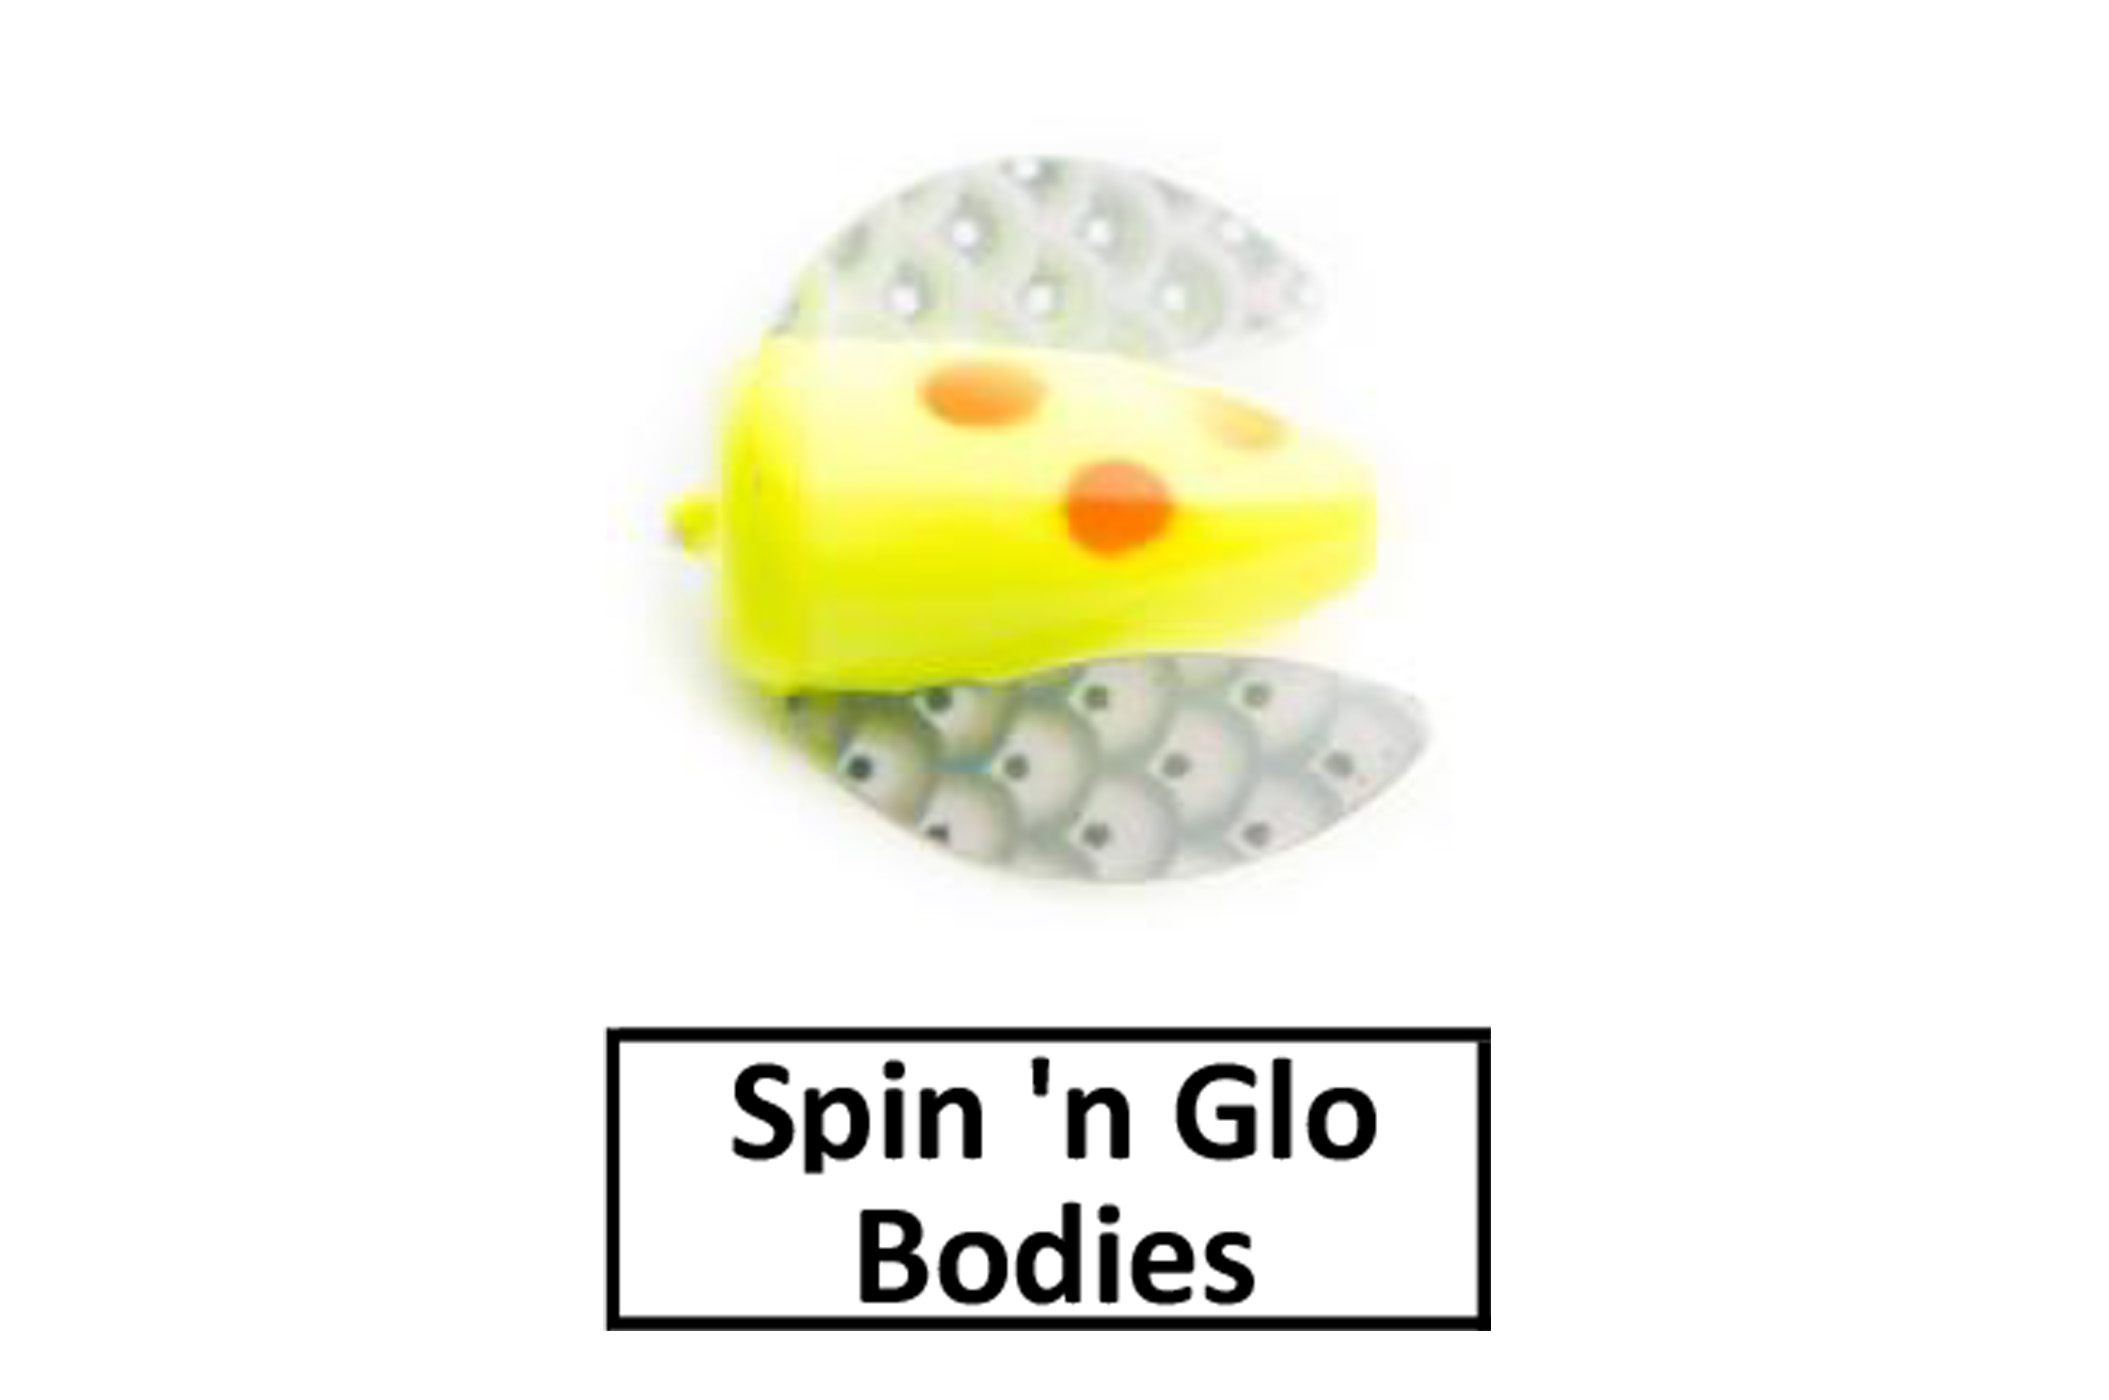 Spin-N-Glo Bodies (spinner)